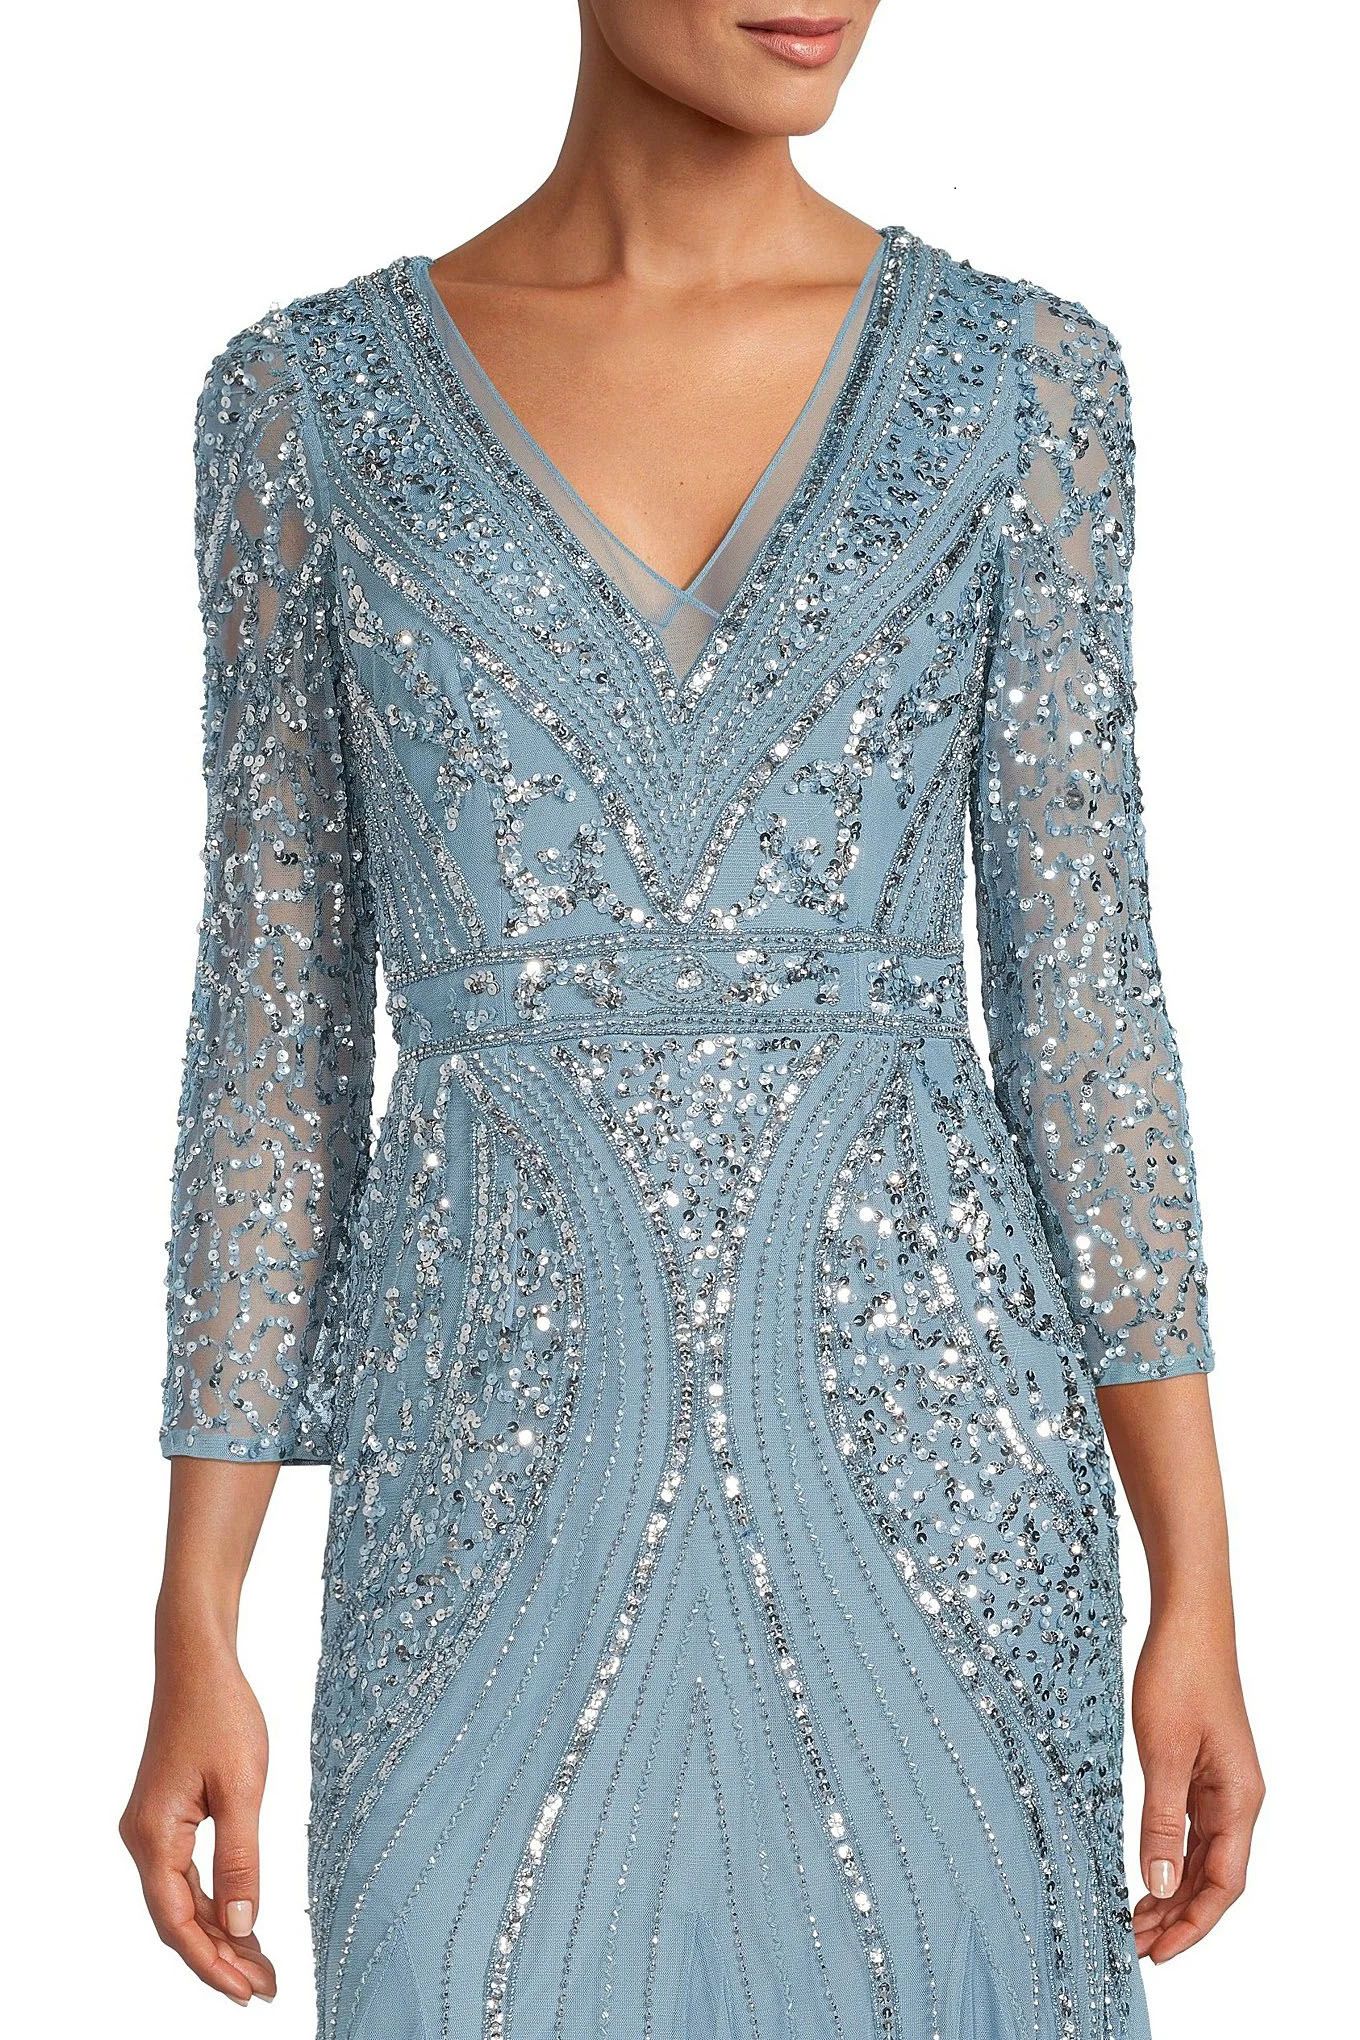 Aggregate more than 186 adrianna papell beaded gown super hot